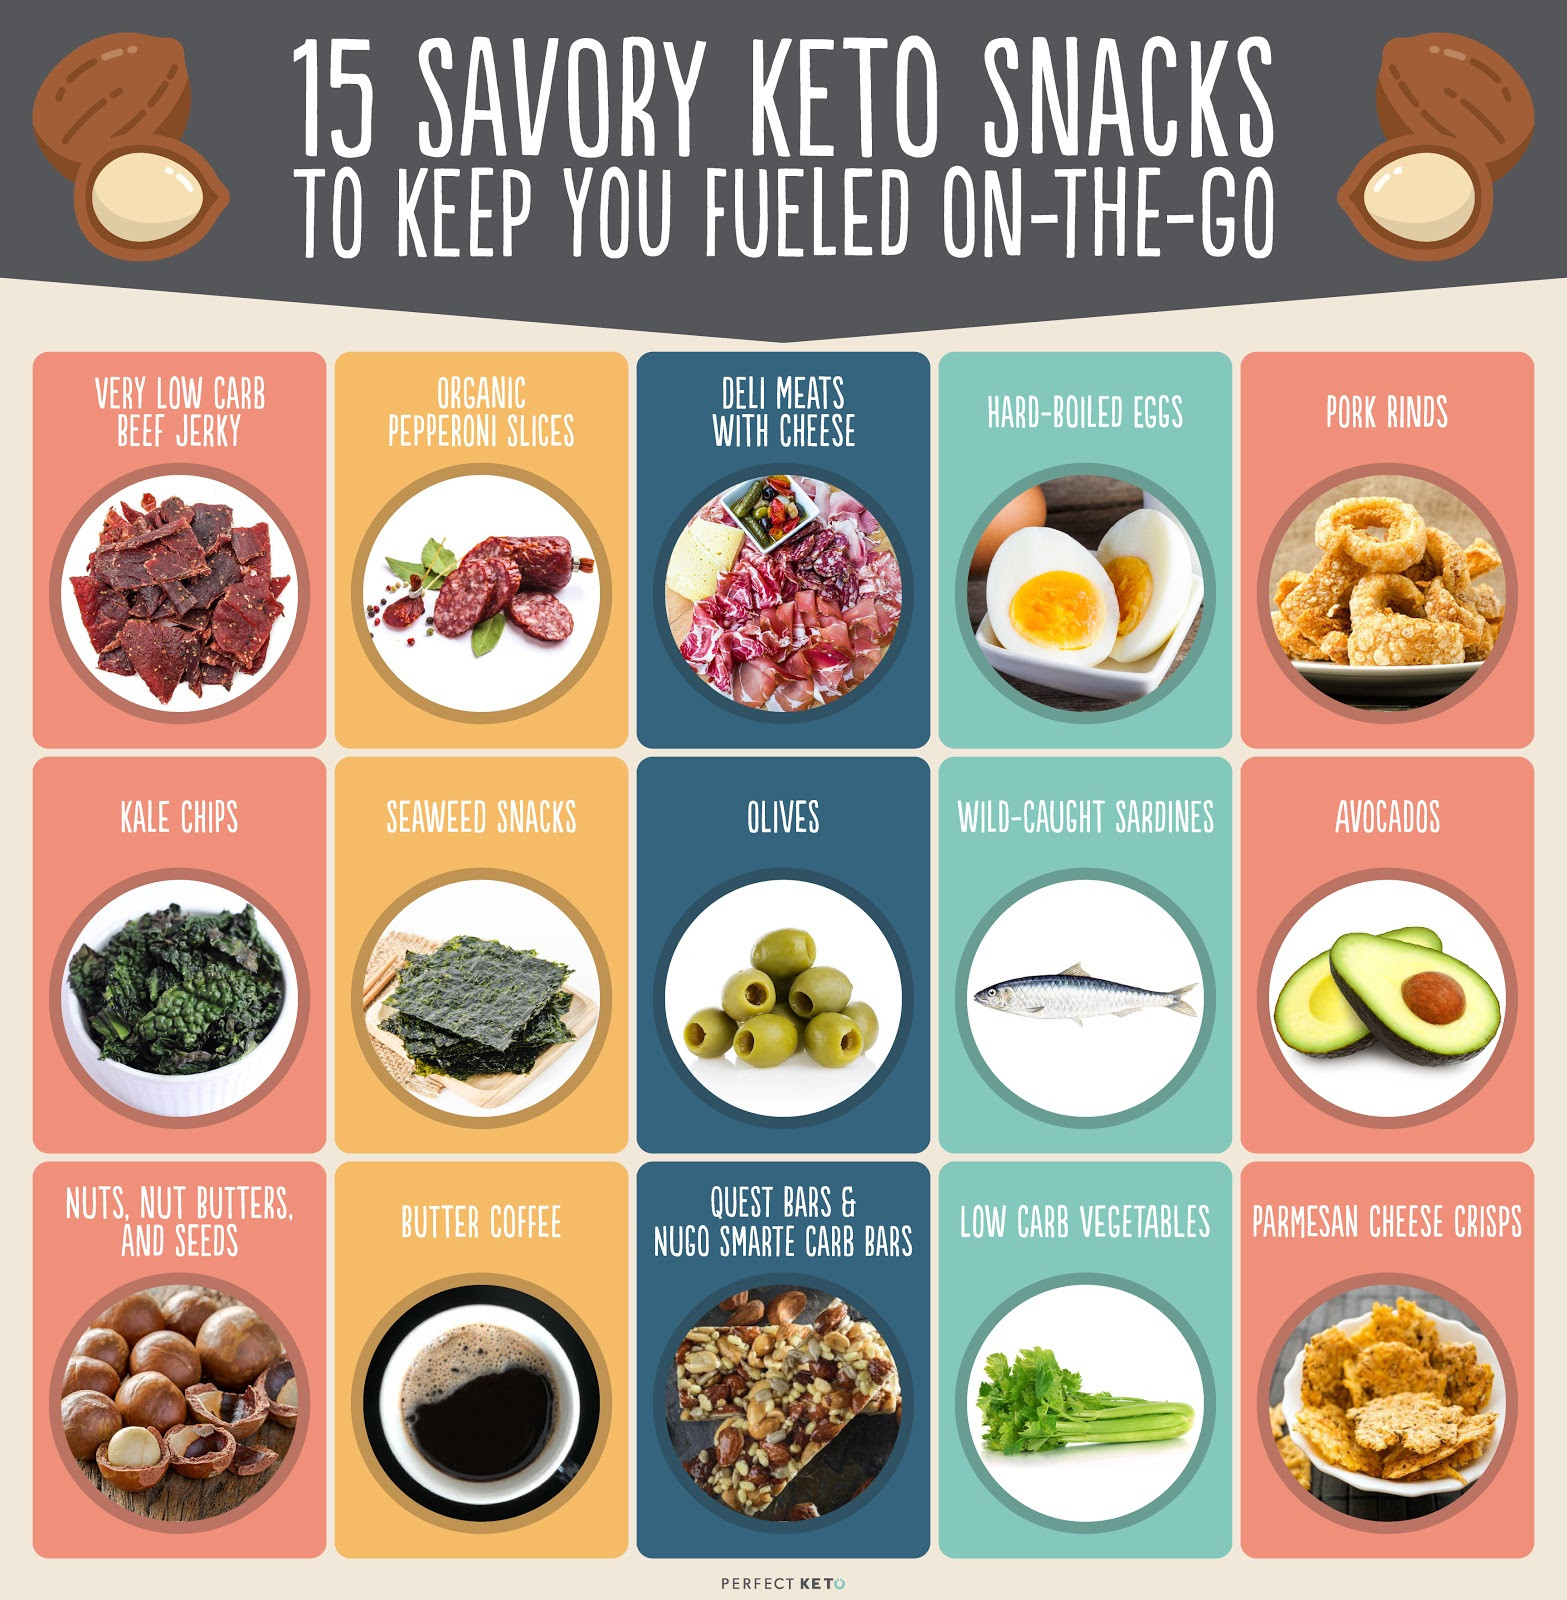 Snacks For Keto Diet
 Ready For You Keto Snacks To Buy 20 Easy Ways to Stay on